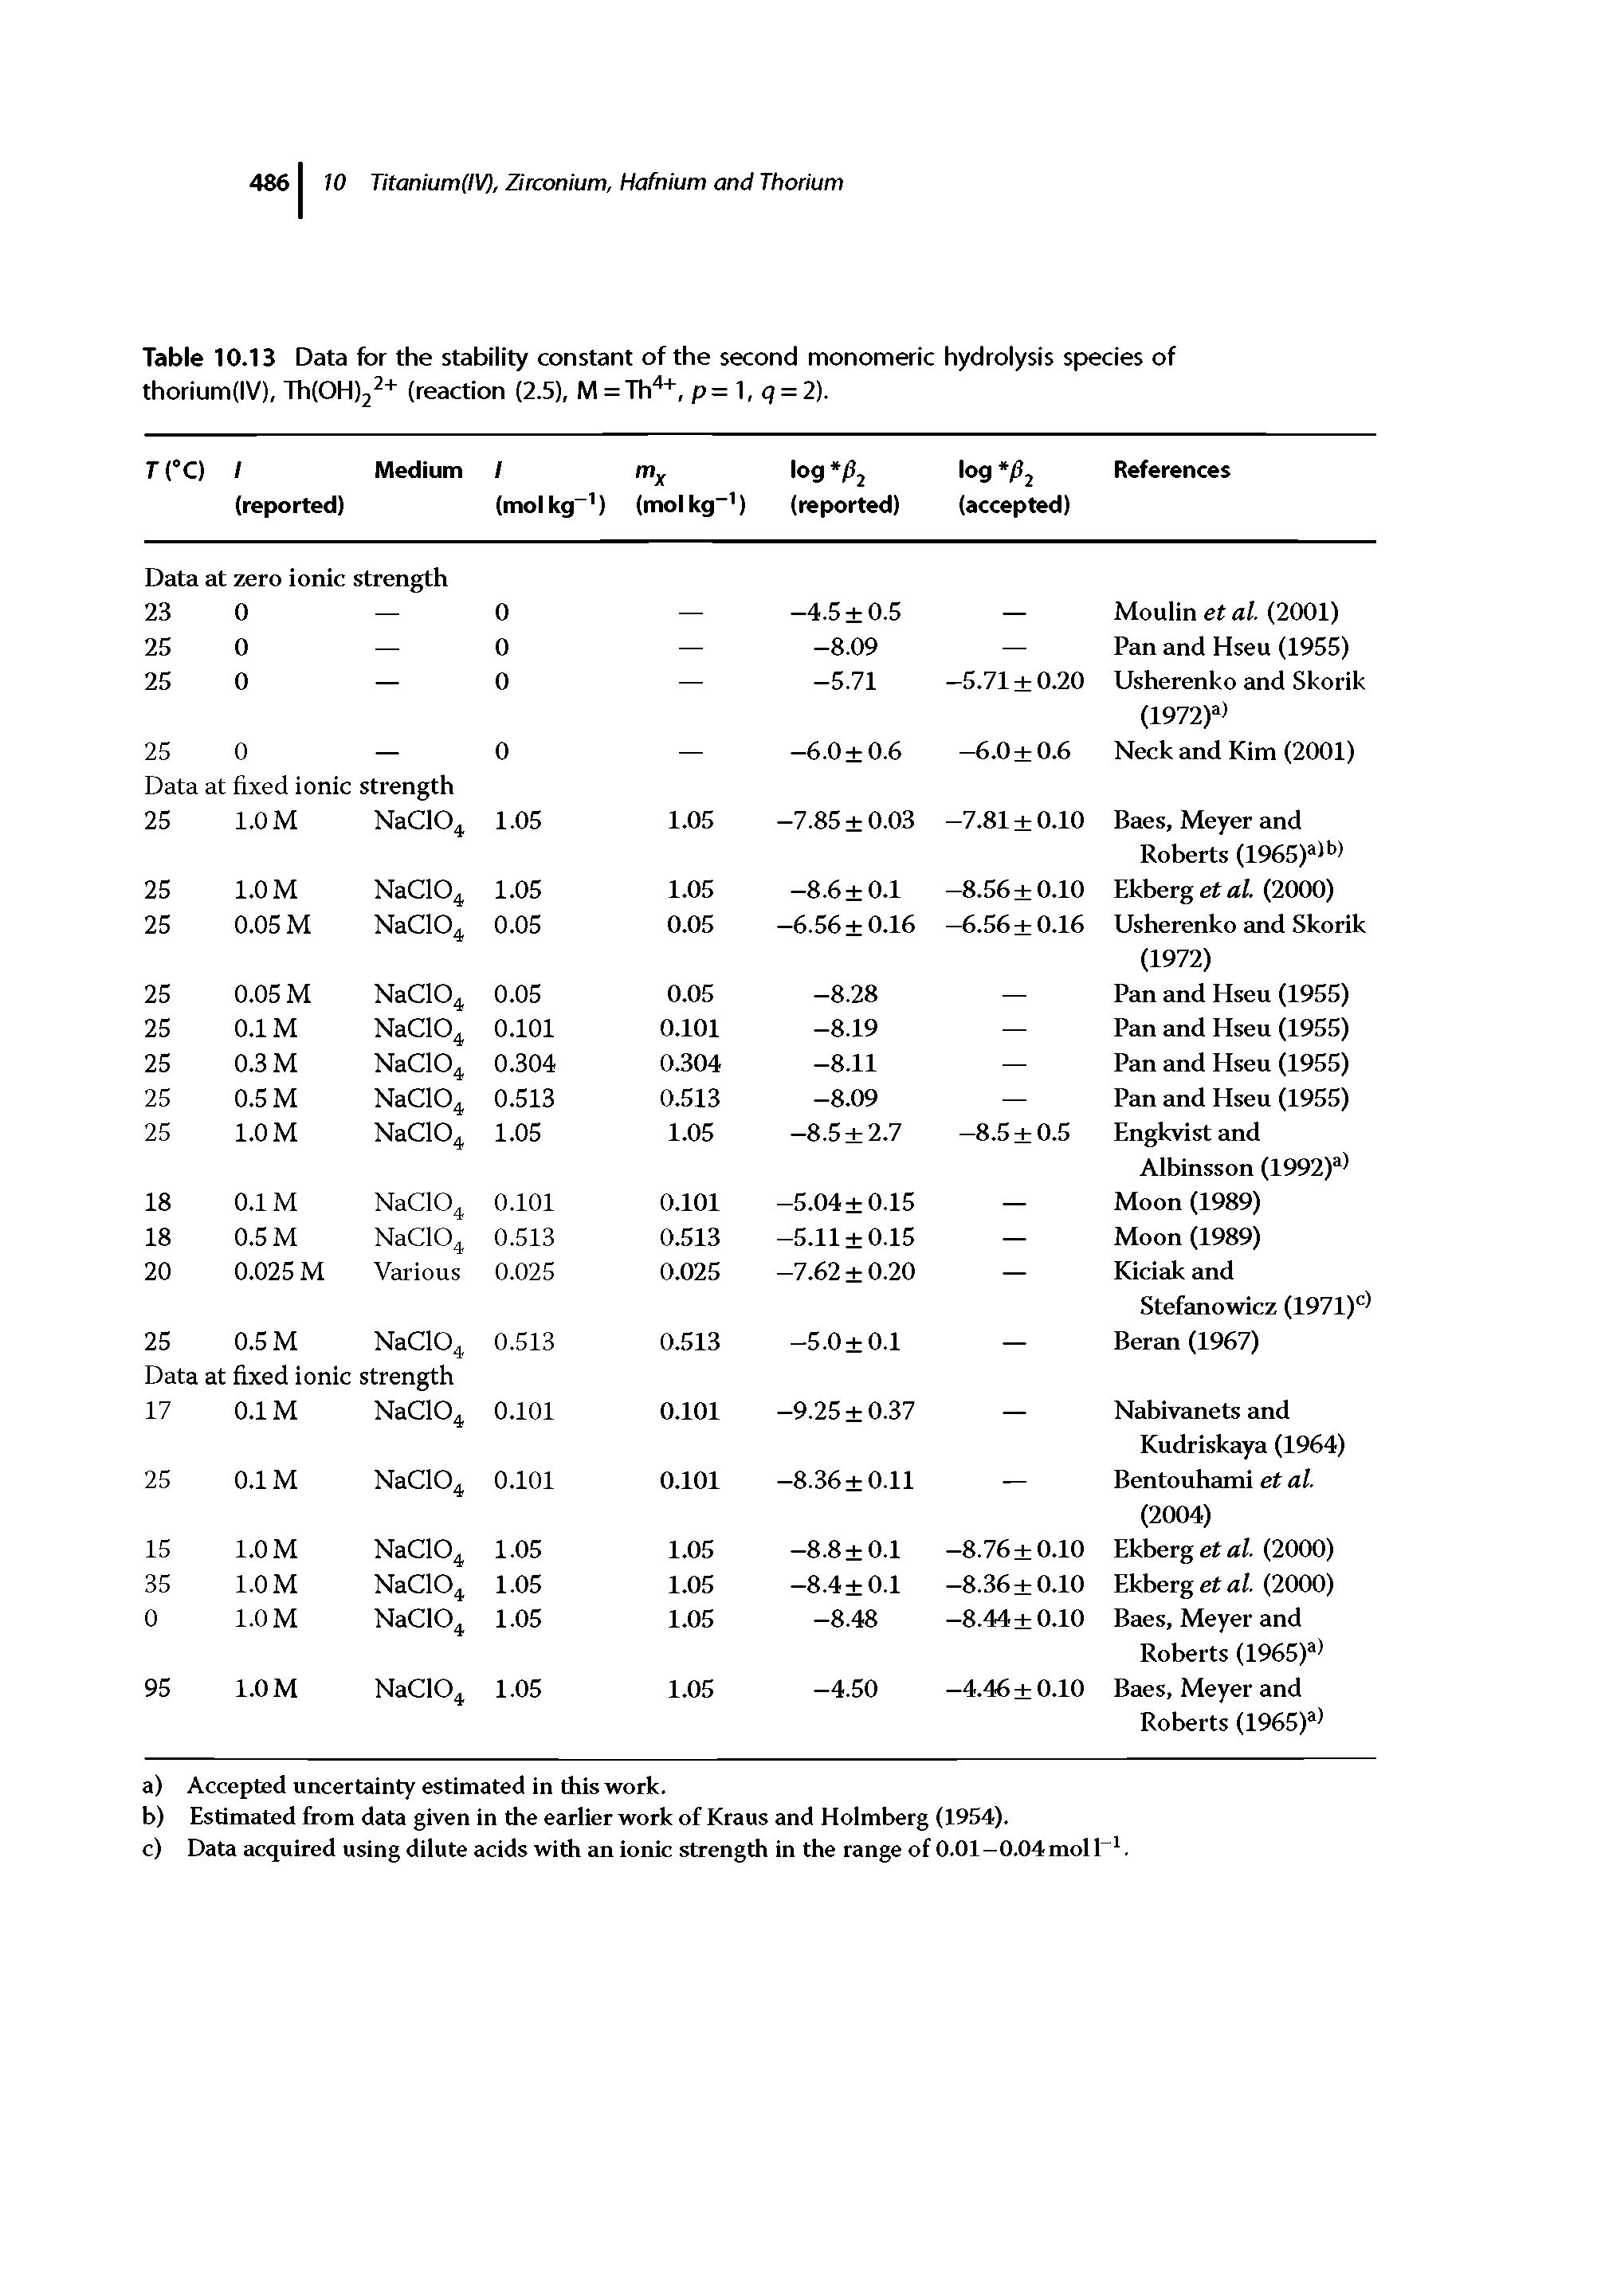 Table 10.13 Data for the stability constant of the second monomeric hydrolysis species of thorium(IV), Th(OH)2 + (reaction (2.5), M = Th , p= 1, j = 2).